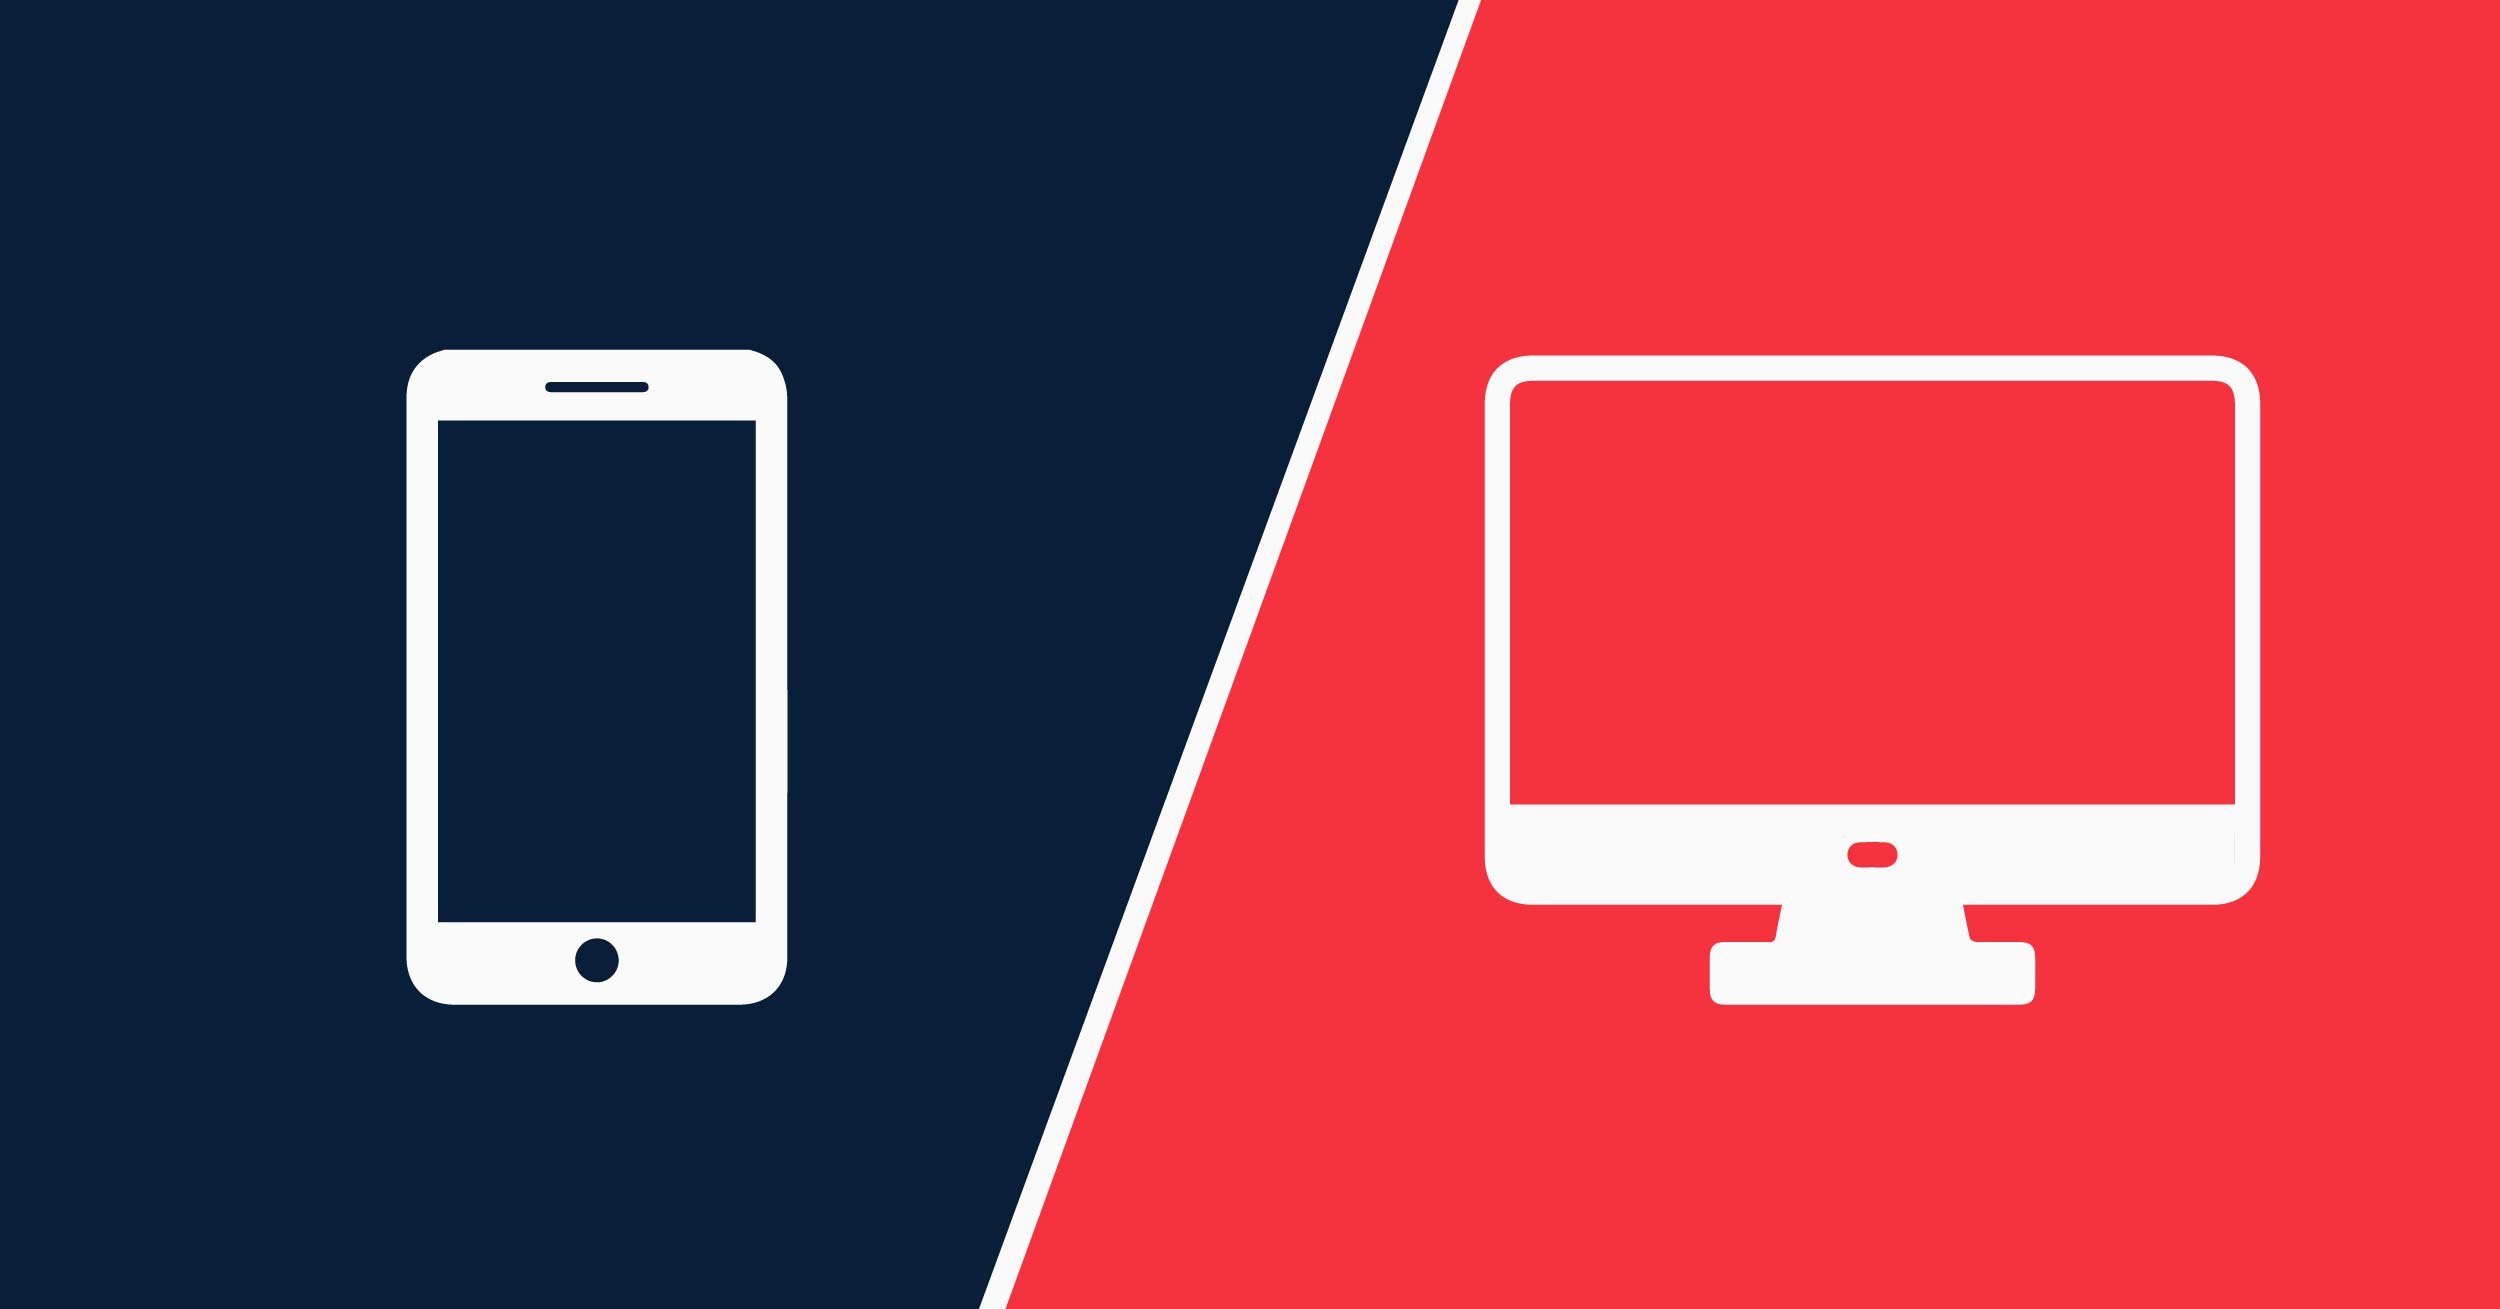 graphic icons representing mobile-first web design vs. traditional web design